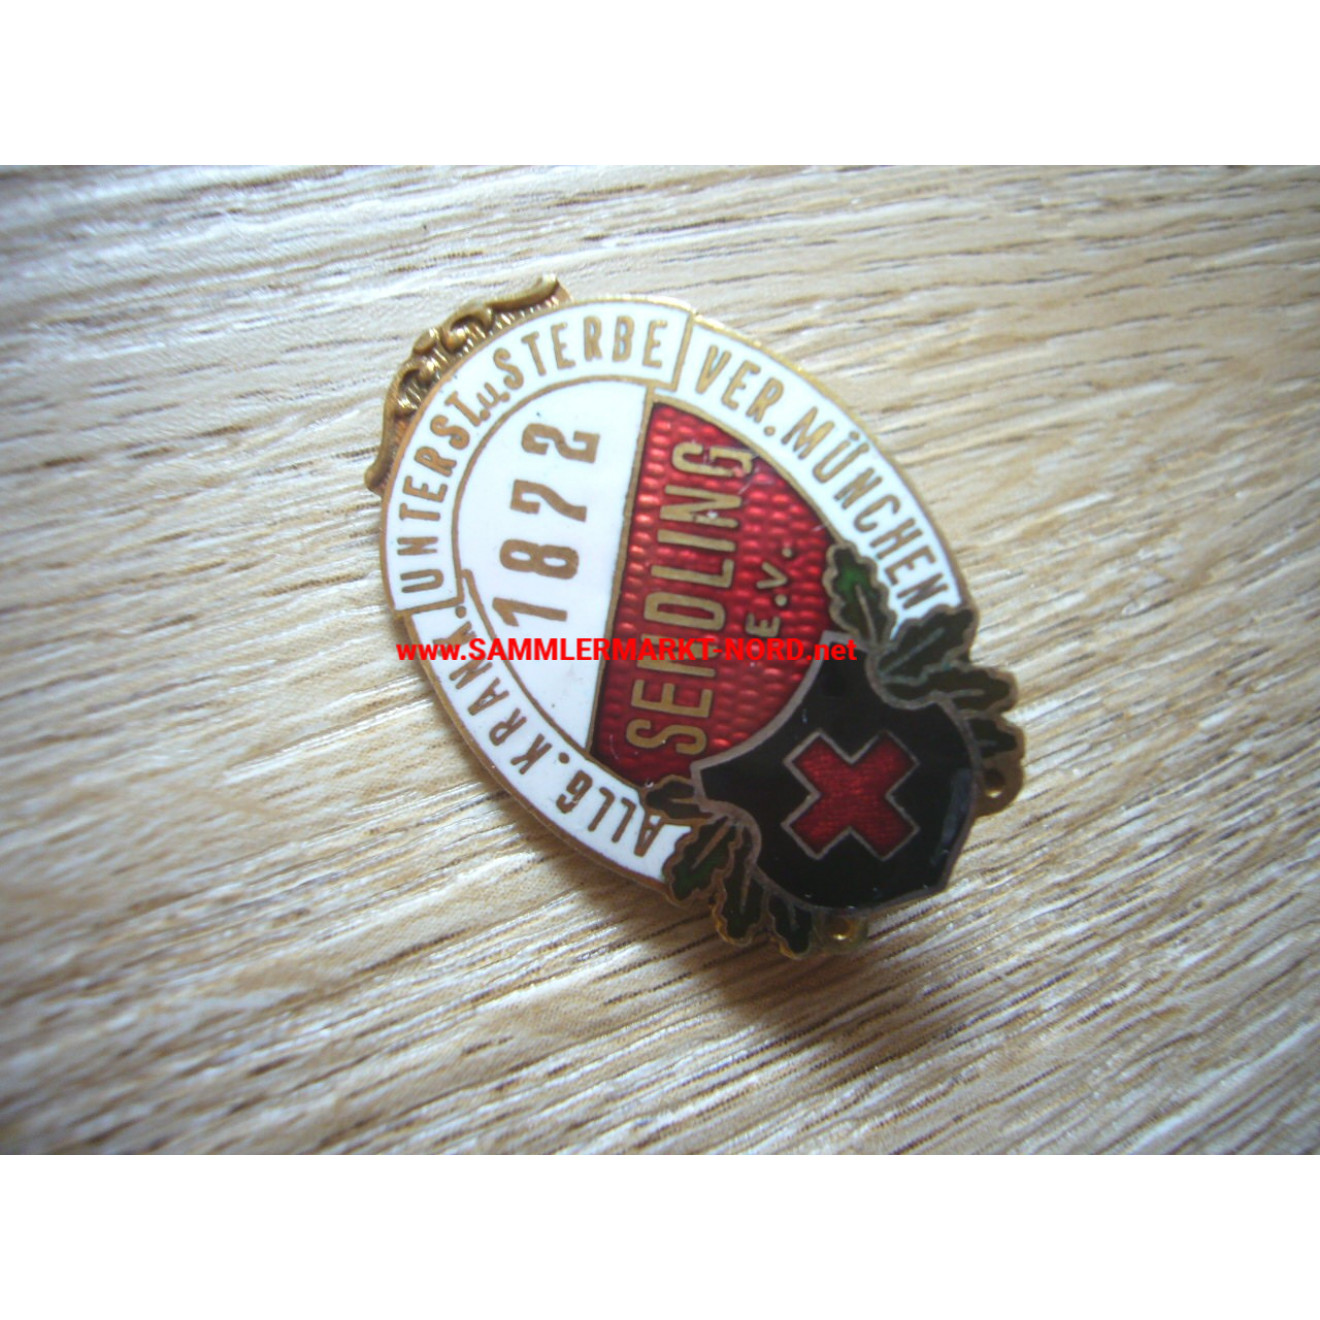 Red Cross - General Sick and Dying Association Munich - Sendling 1872 - Badge